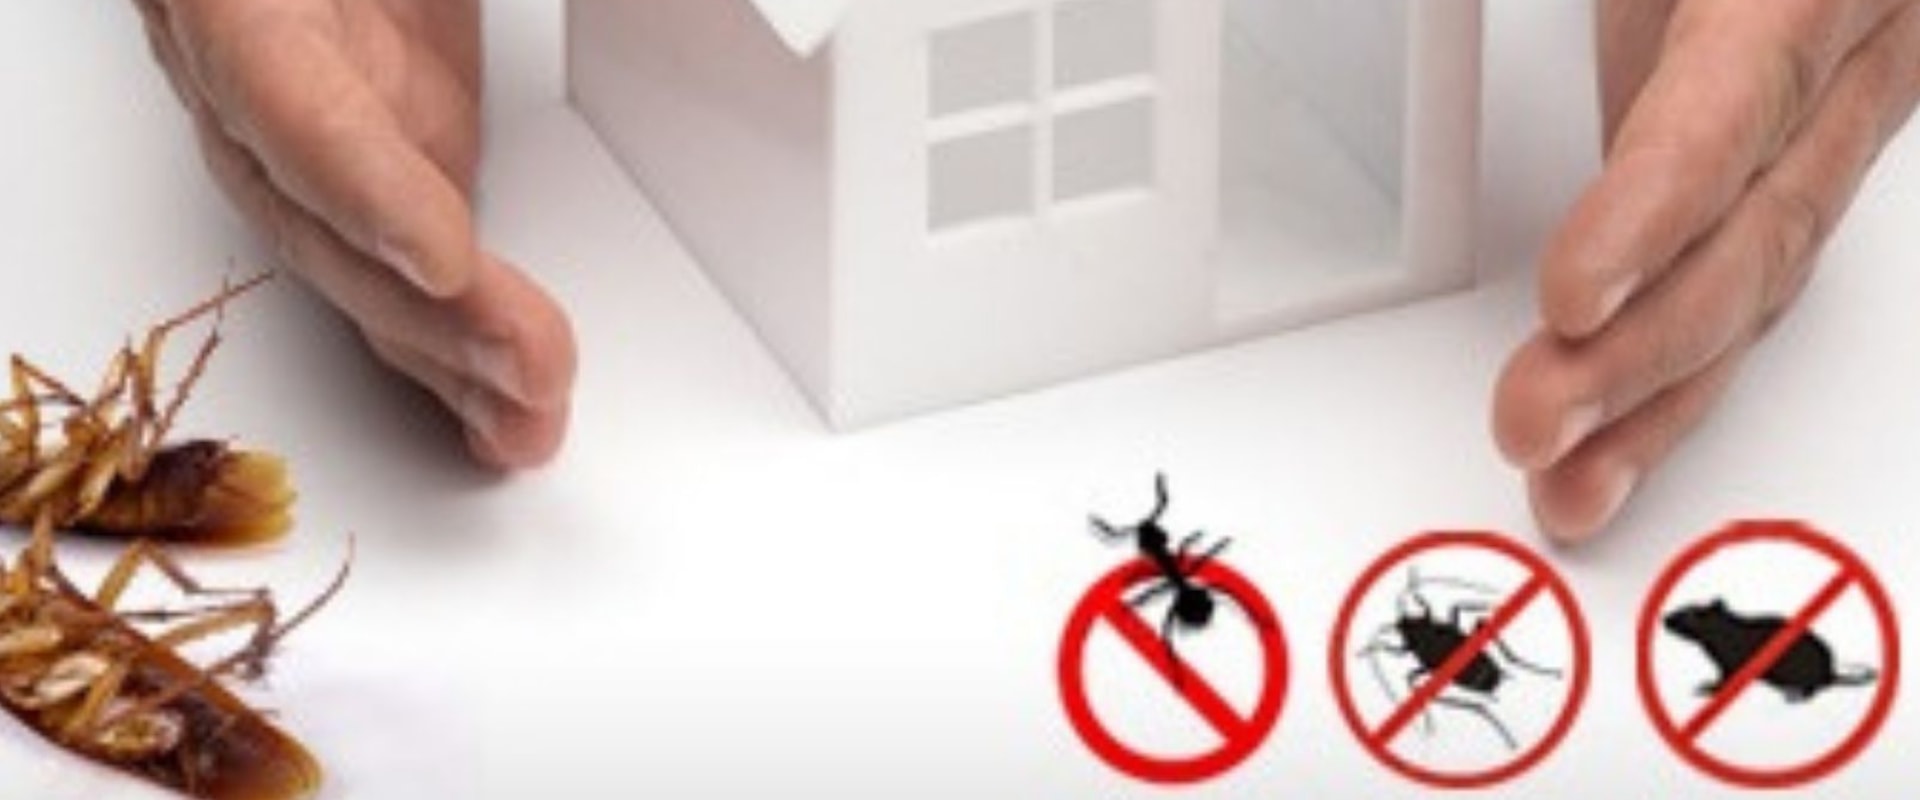 When to do pest control for home?